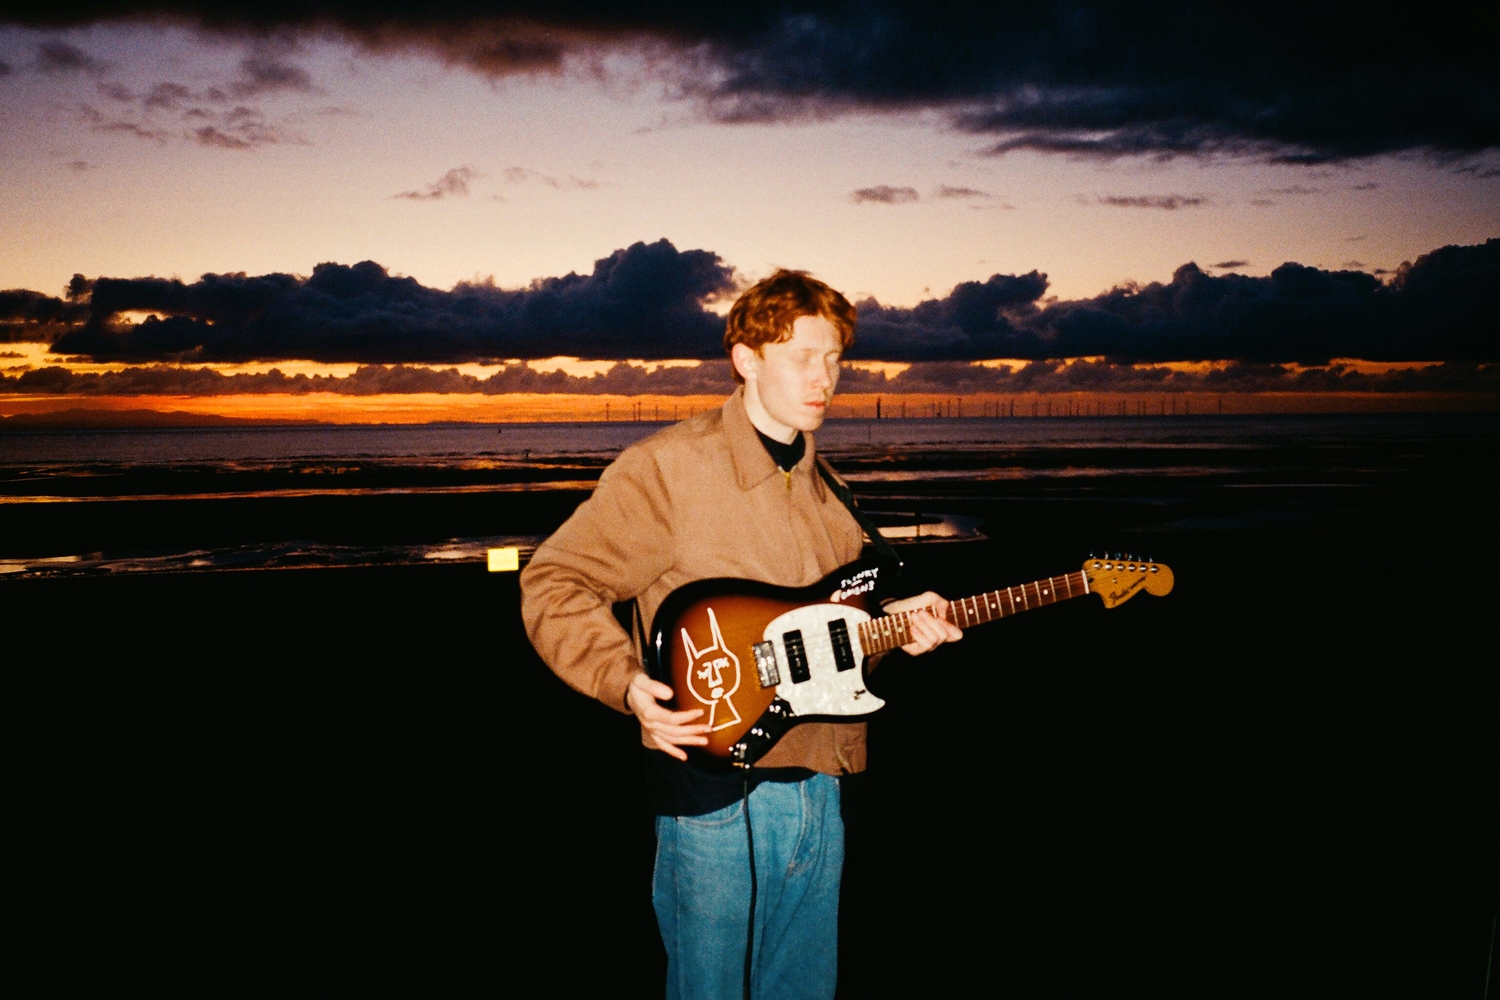 King Krule releases short film 'Hey World!', announces European and North American tour